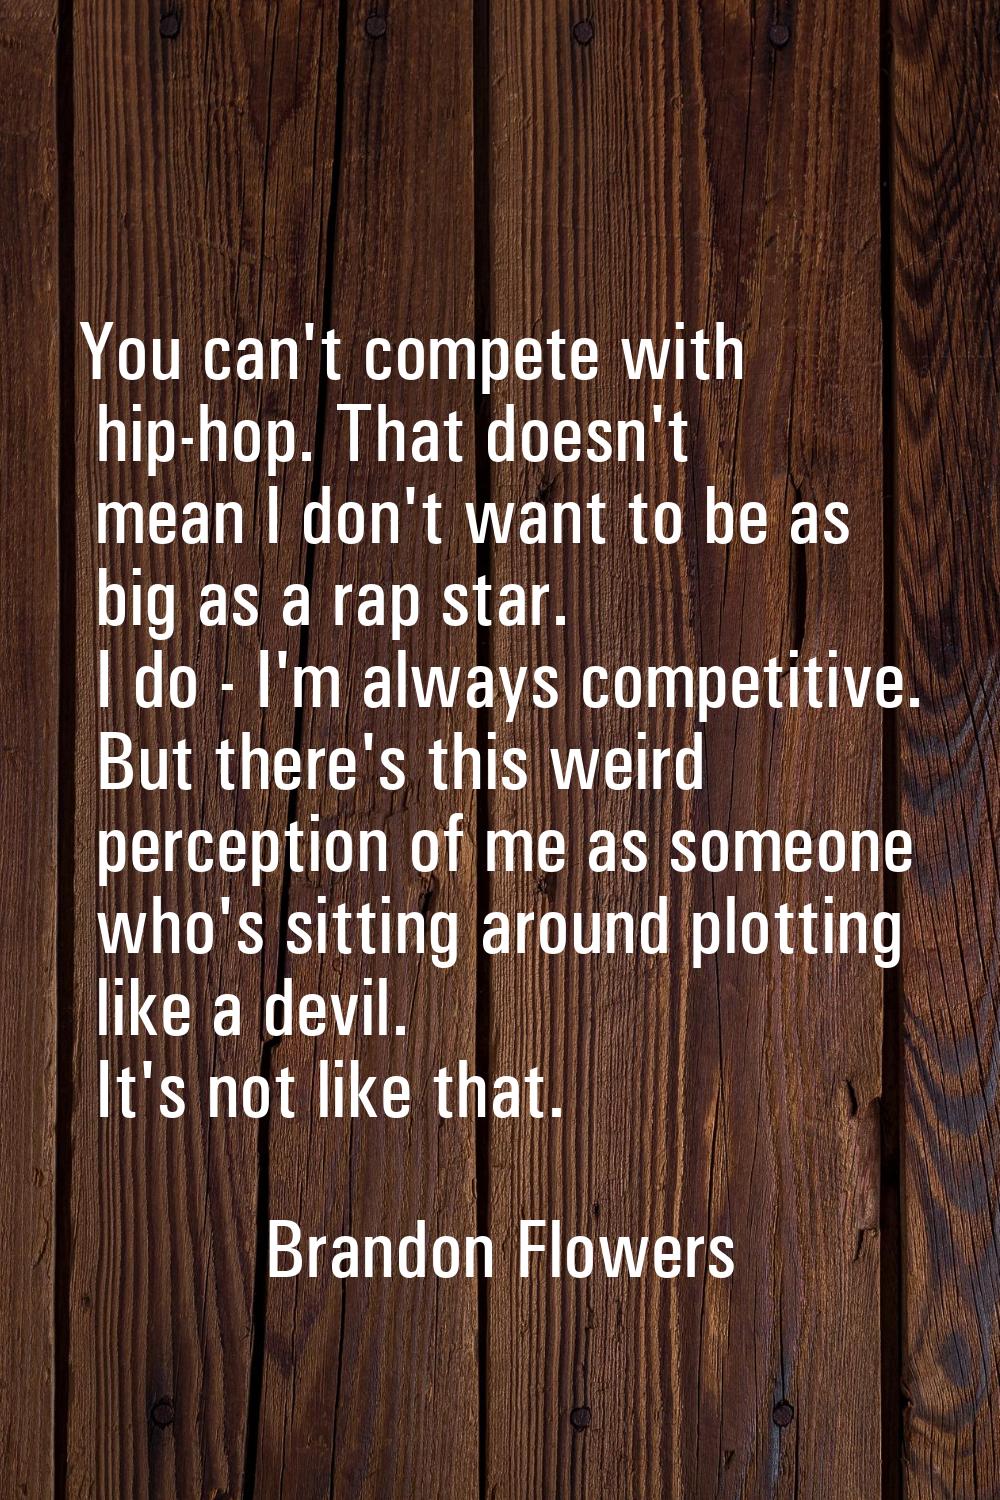 You can't compete with hip-hop. That doesn't mean I don't want to be as big as a rap star. I do - I